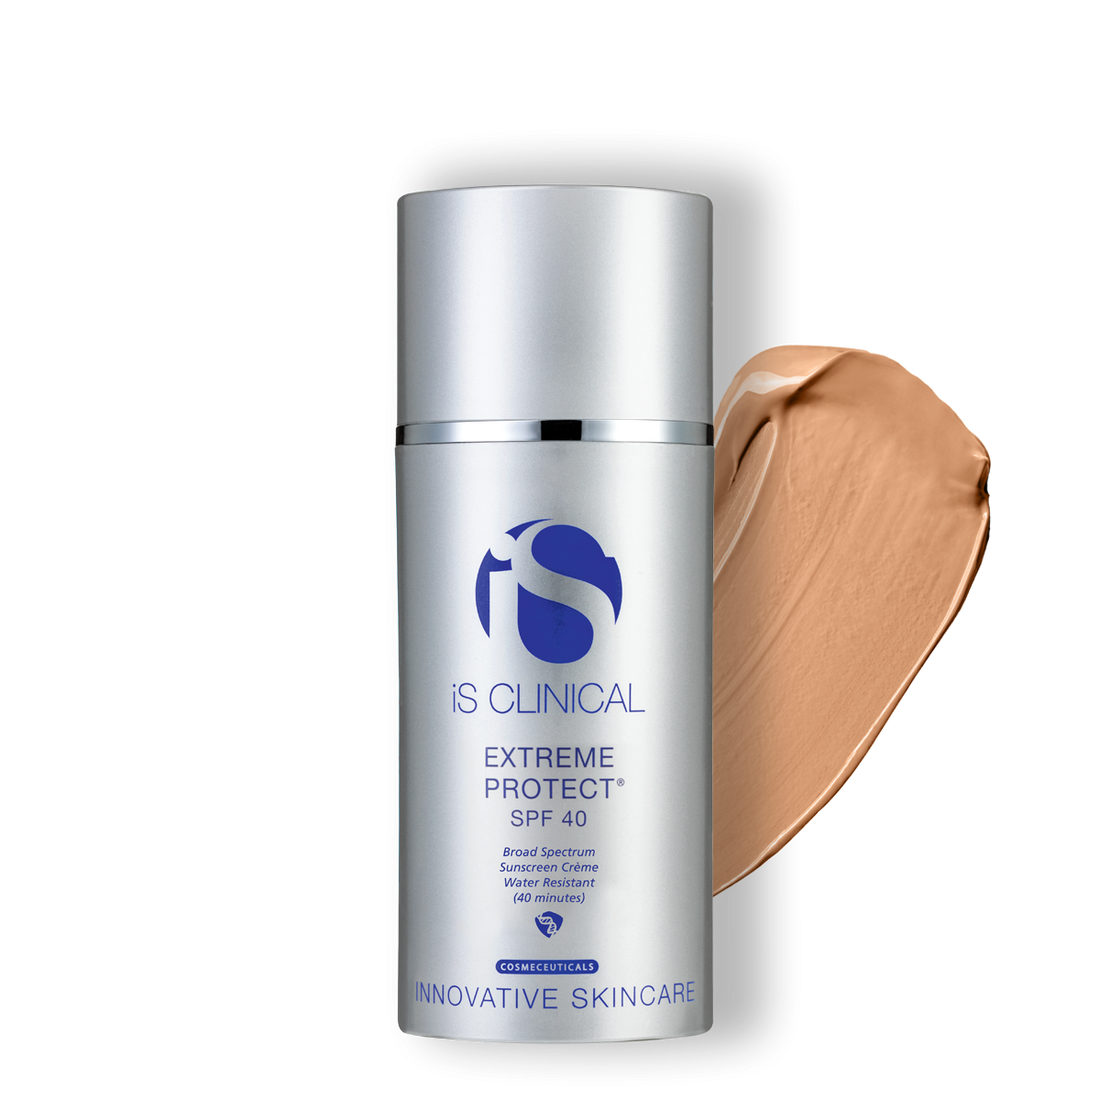 iS Clinical Extreme Protect SPF 40 - best known for being an RESTORATIVE, ALL-PHYSICAL SUNSCREEN with ULTIMATE PROTECTION. Shown in bronze.